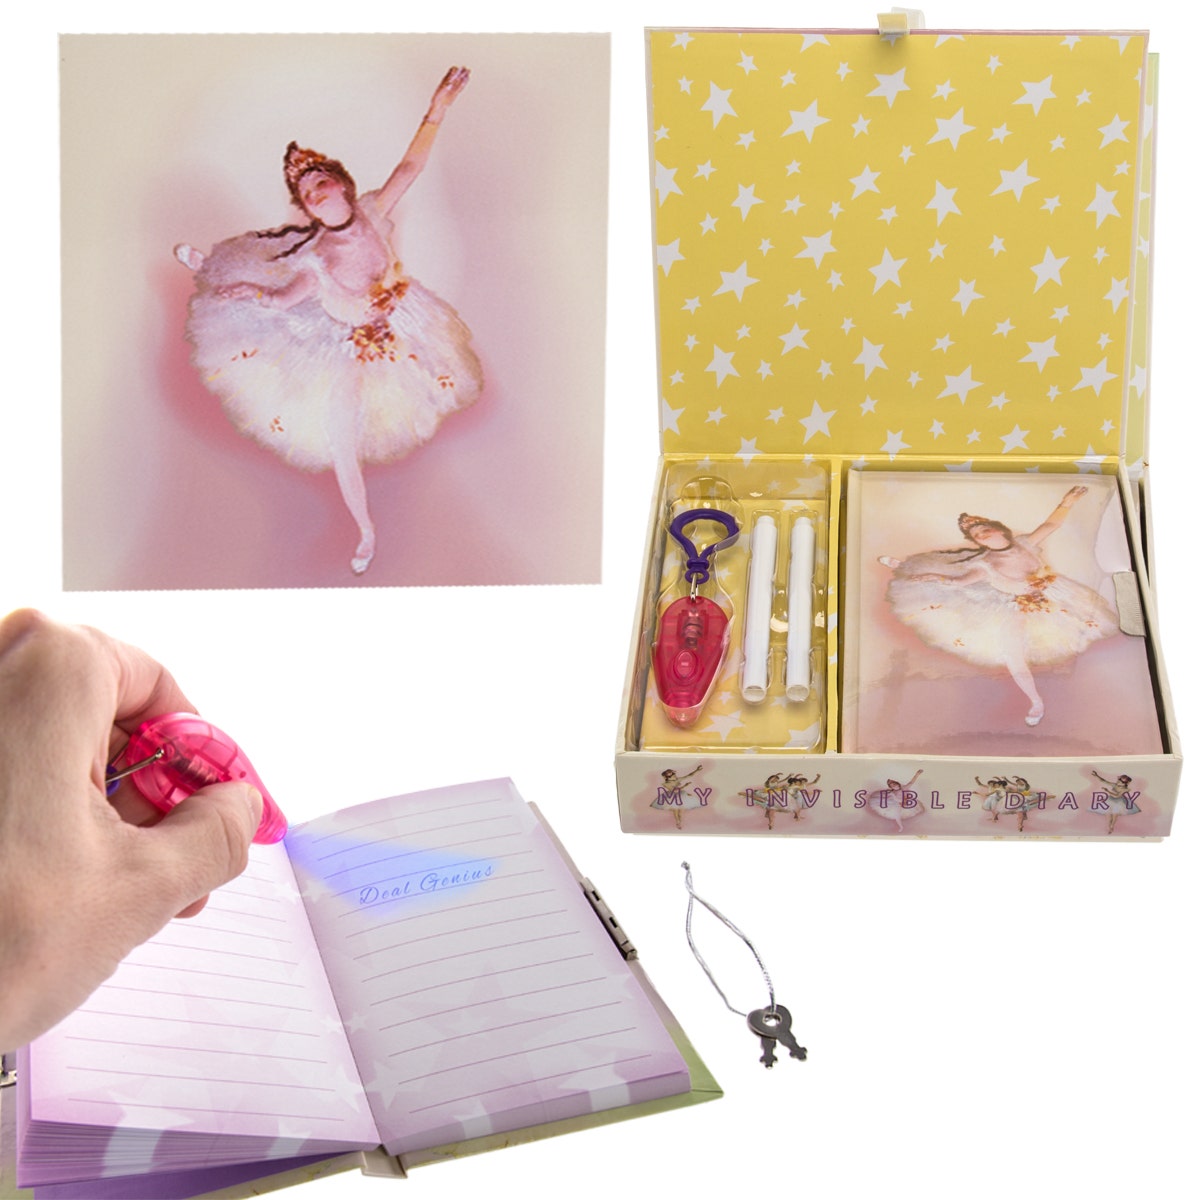 Locking Diary With Invisible Ink Pens – Write Secret Messages!